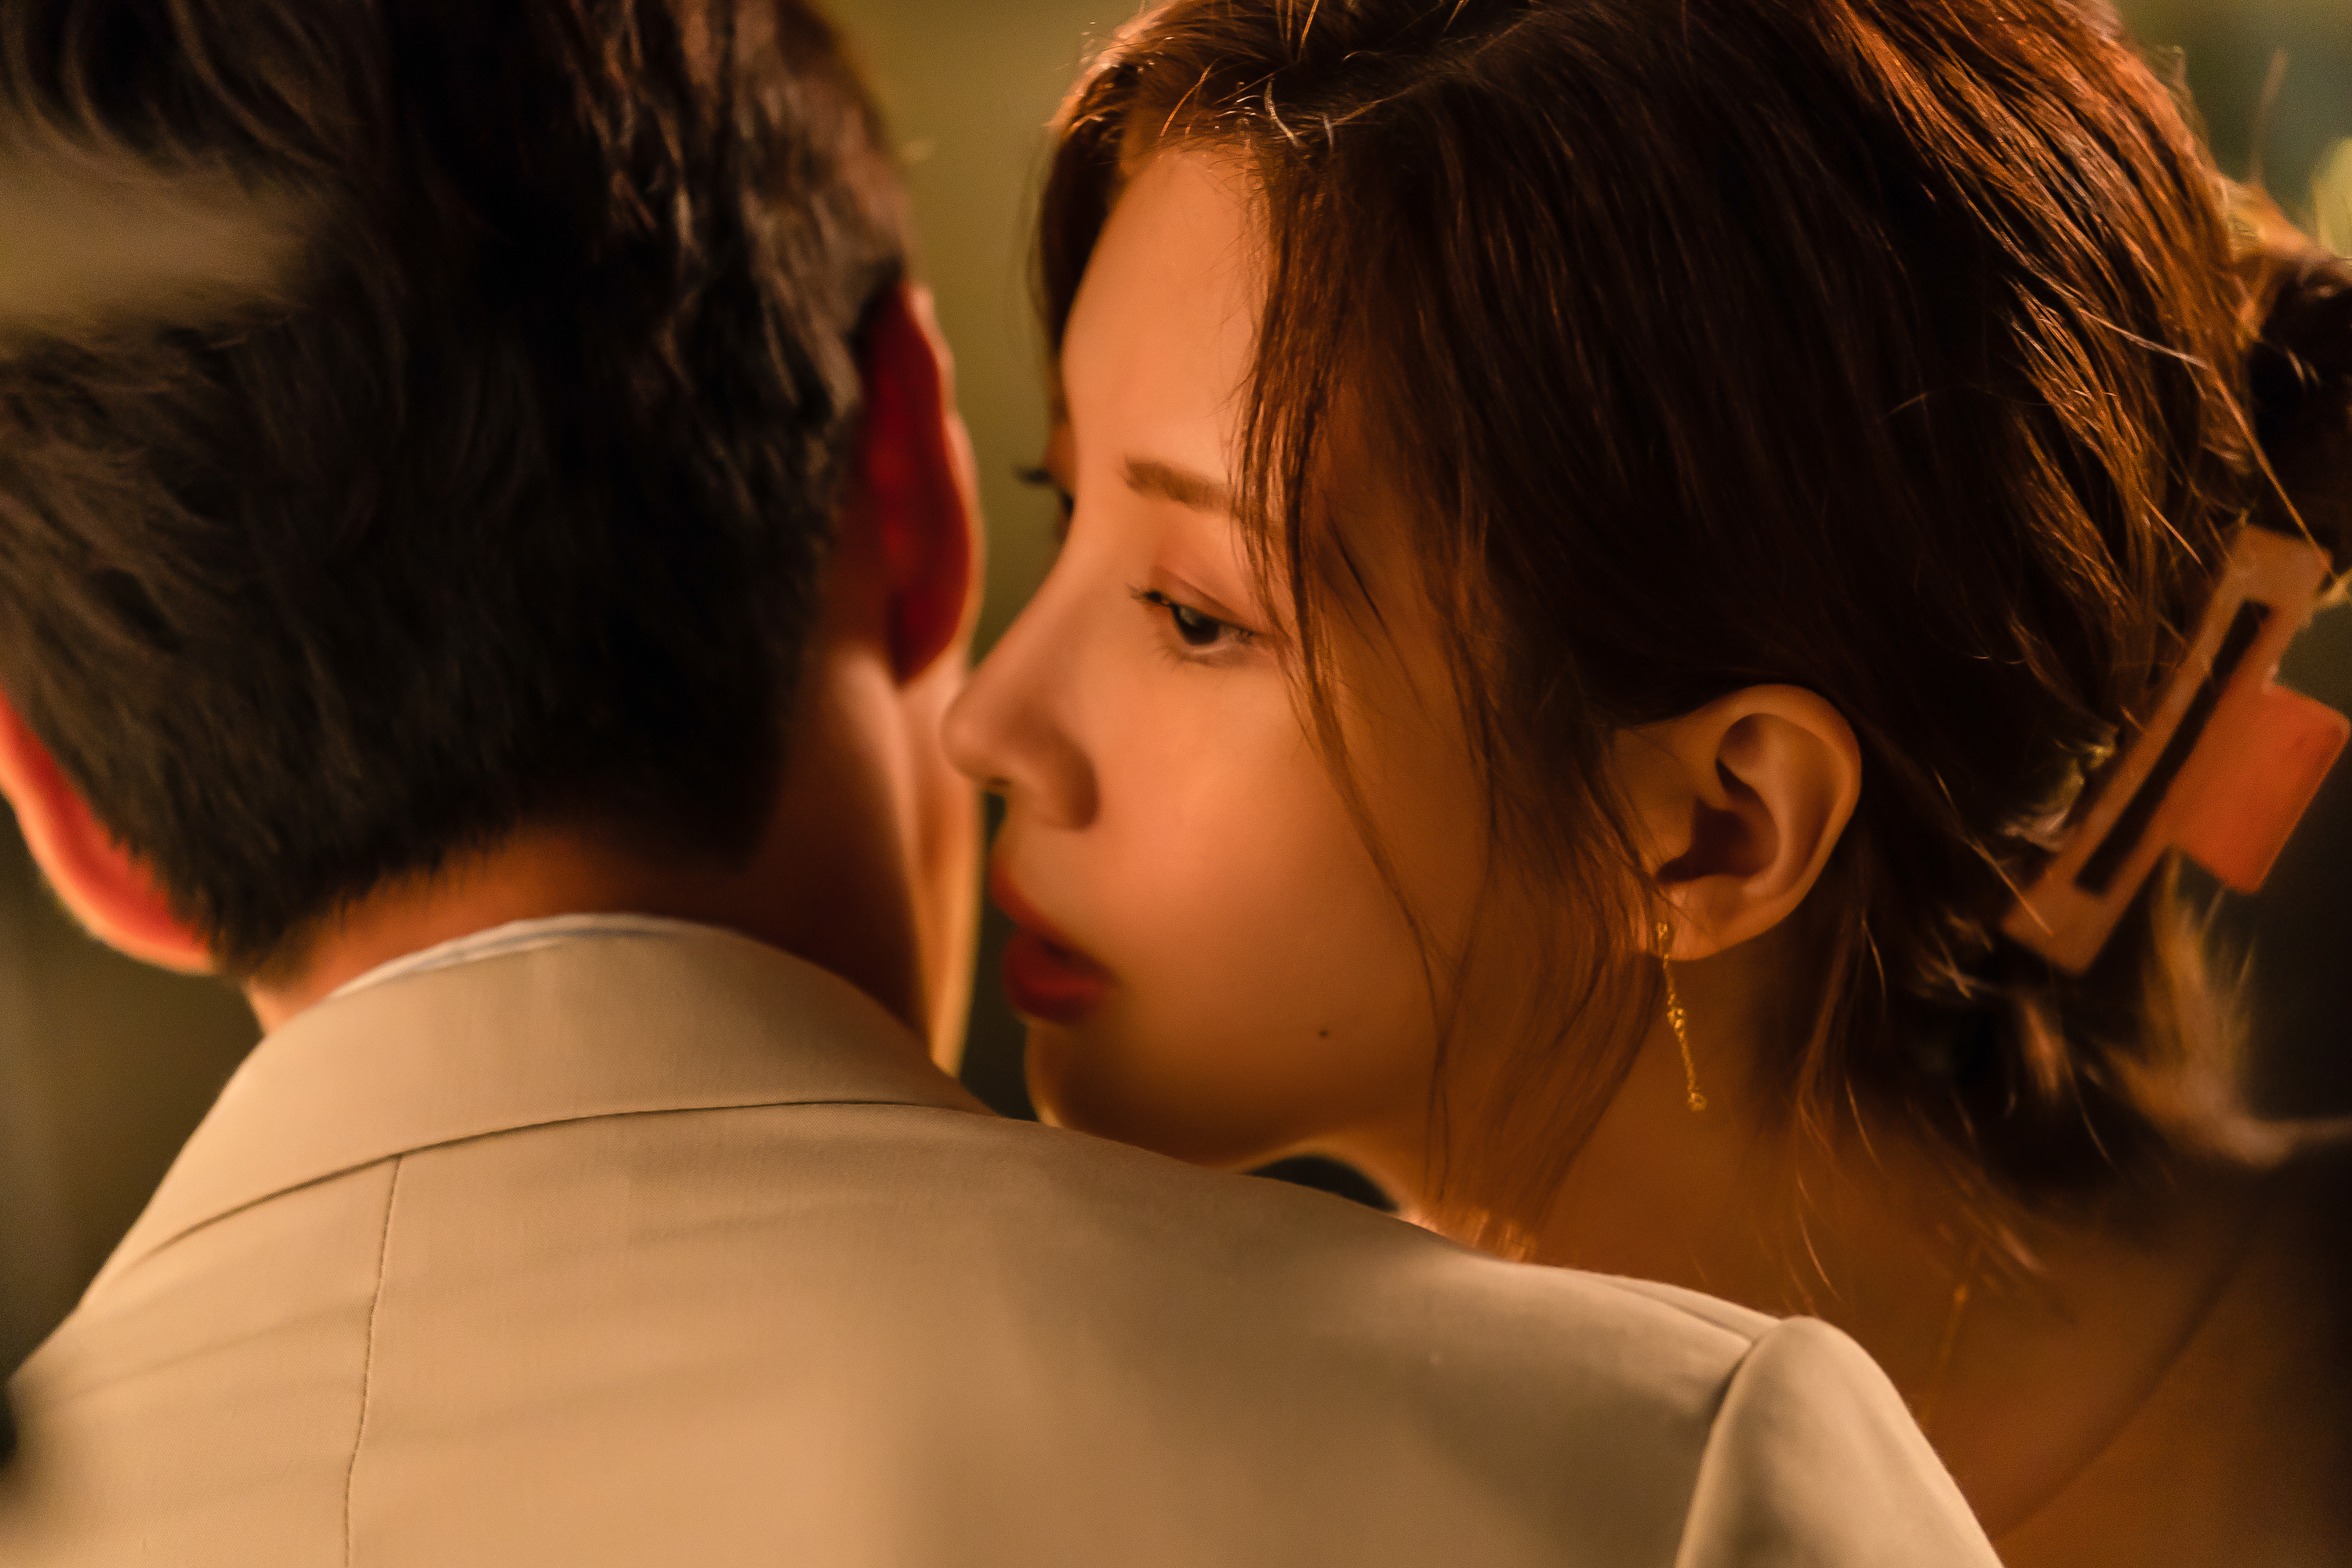 Netflix Love and Leashes Release Date, Cast Starring Seohyun, Trailer and SandM Plot